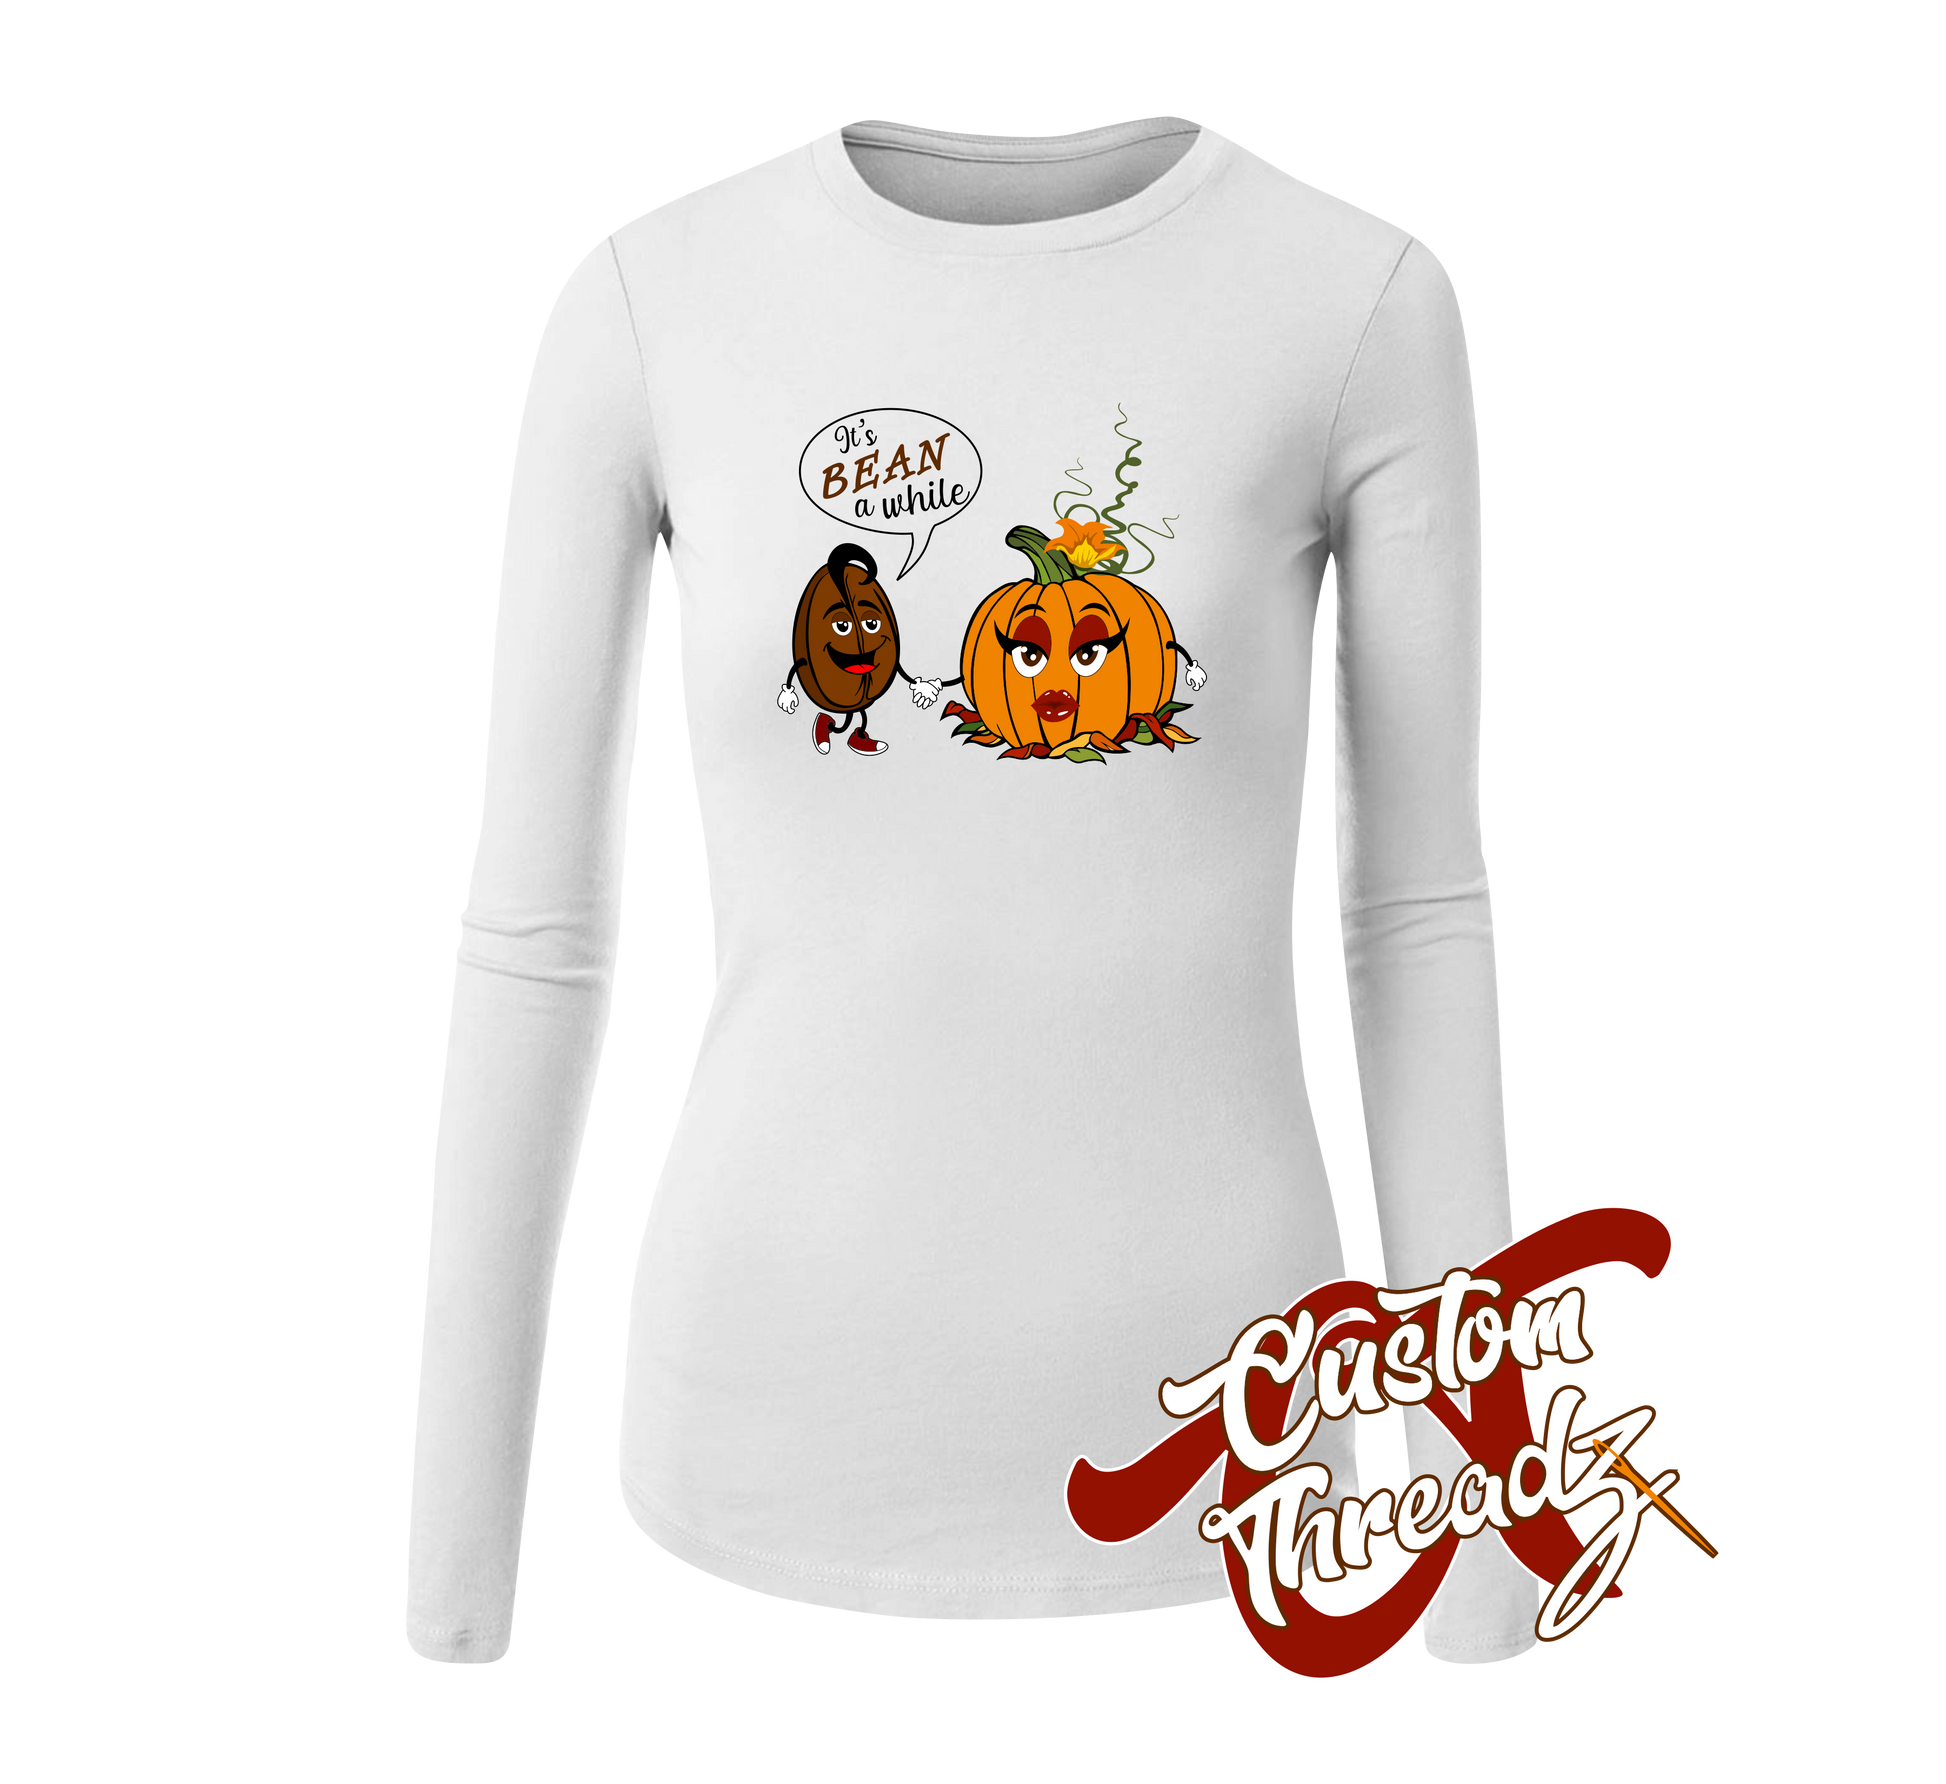 womens white long sleeve tee with bean a while coffee bean and pumpkin DTG printed design